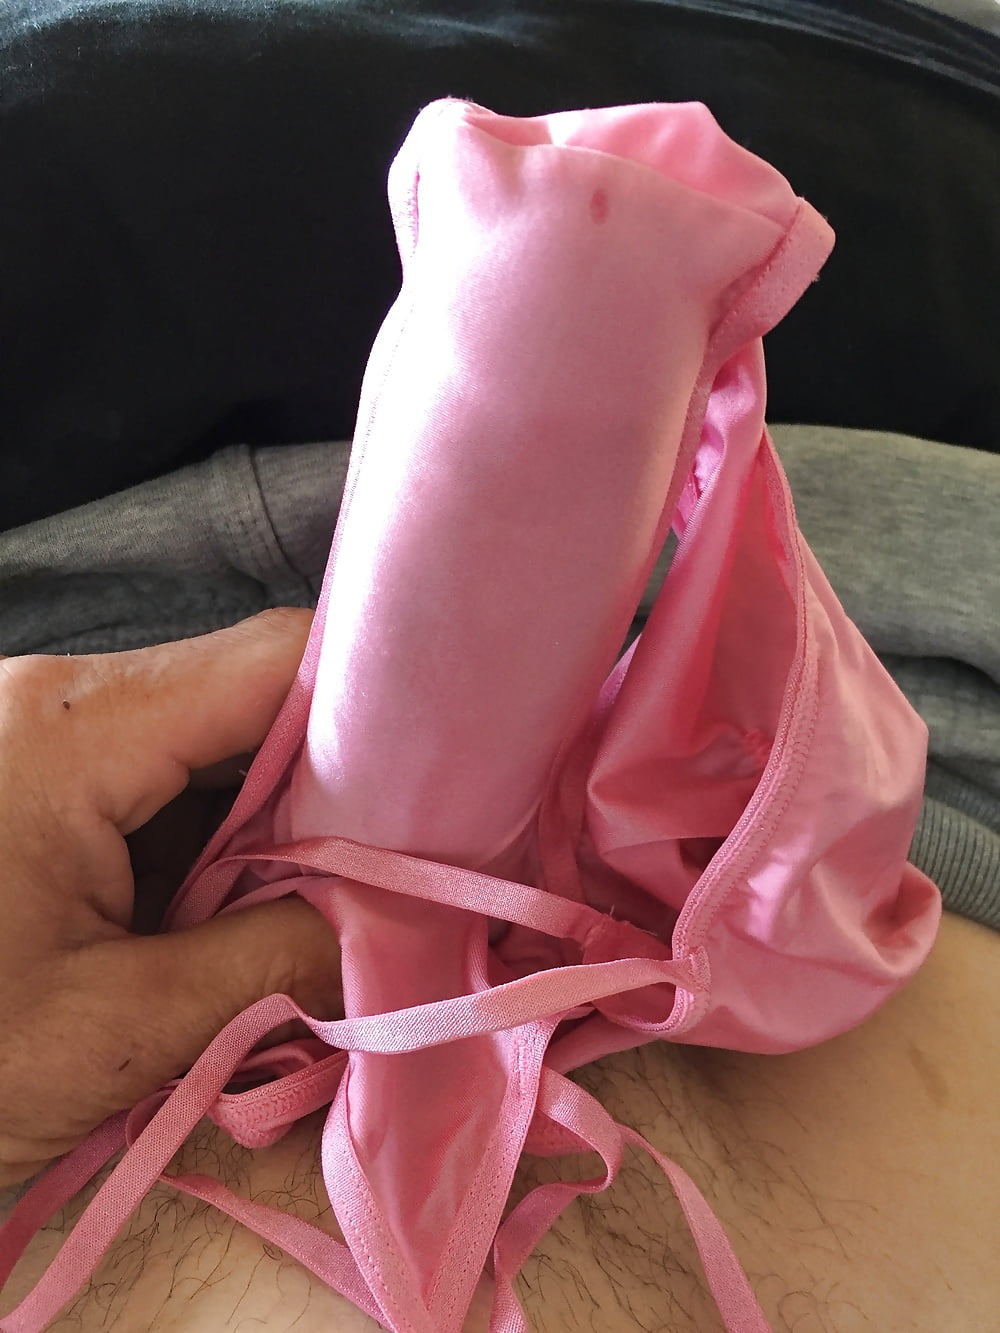 Playing with wife's panties pict gal